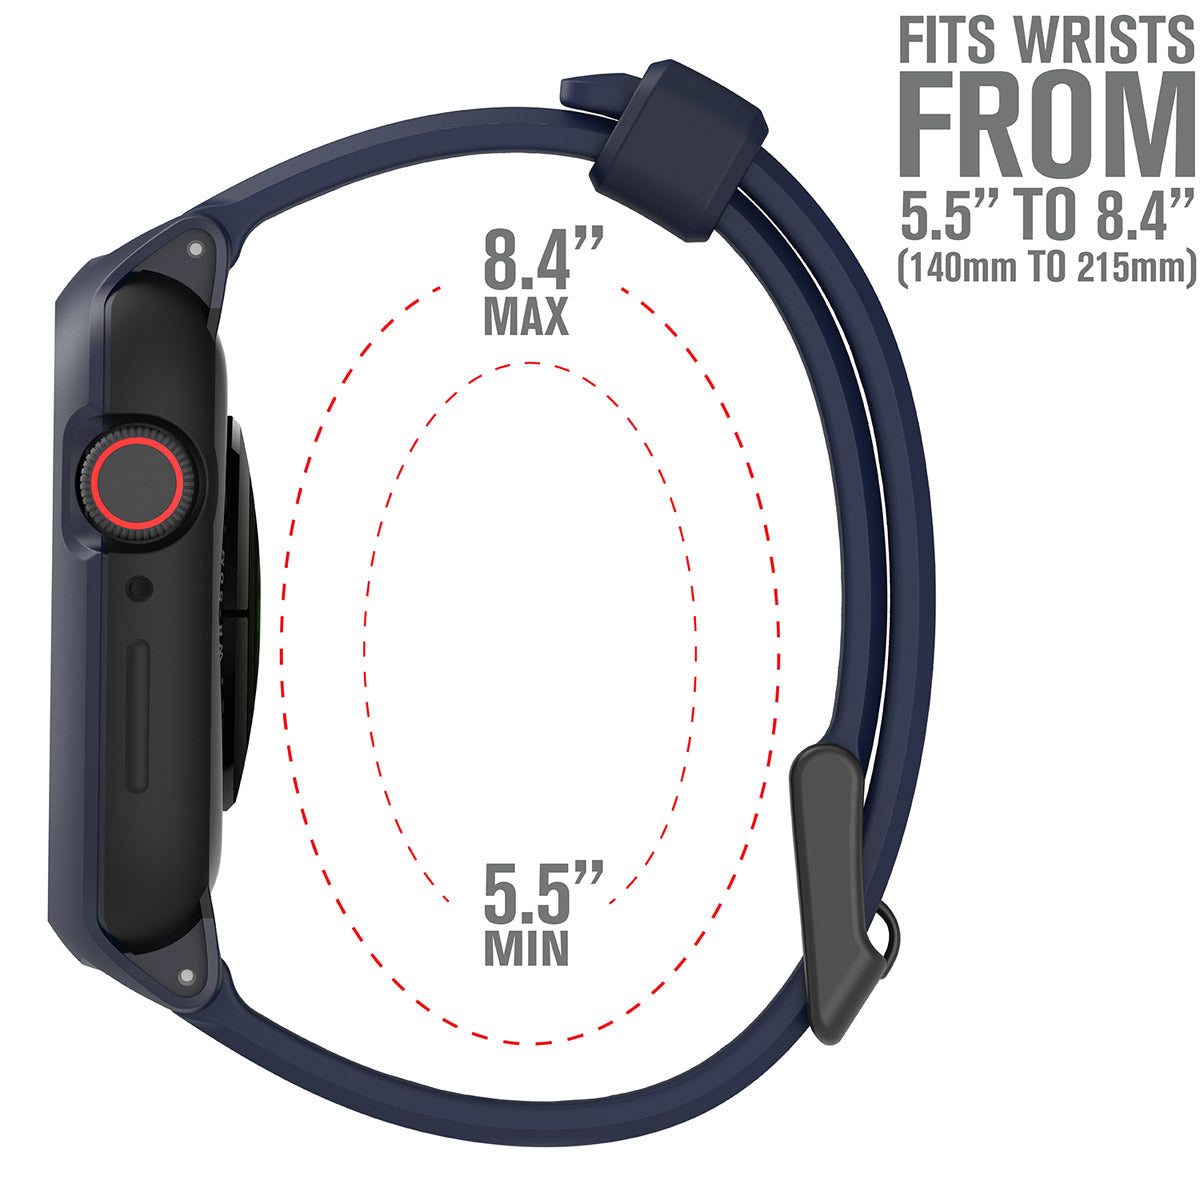 catalyst apple watch series 6 5 4 se gen 21 44mm 40mm impact protection case sport band midnight blue side view of the catalyst case with the minimum and maximum sizes of the band text reads fits wrists from 5.5" to 8.4"(140mm to 215mm)